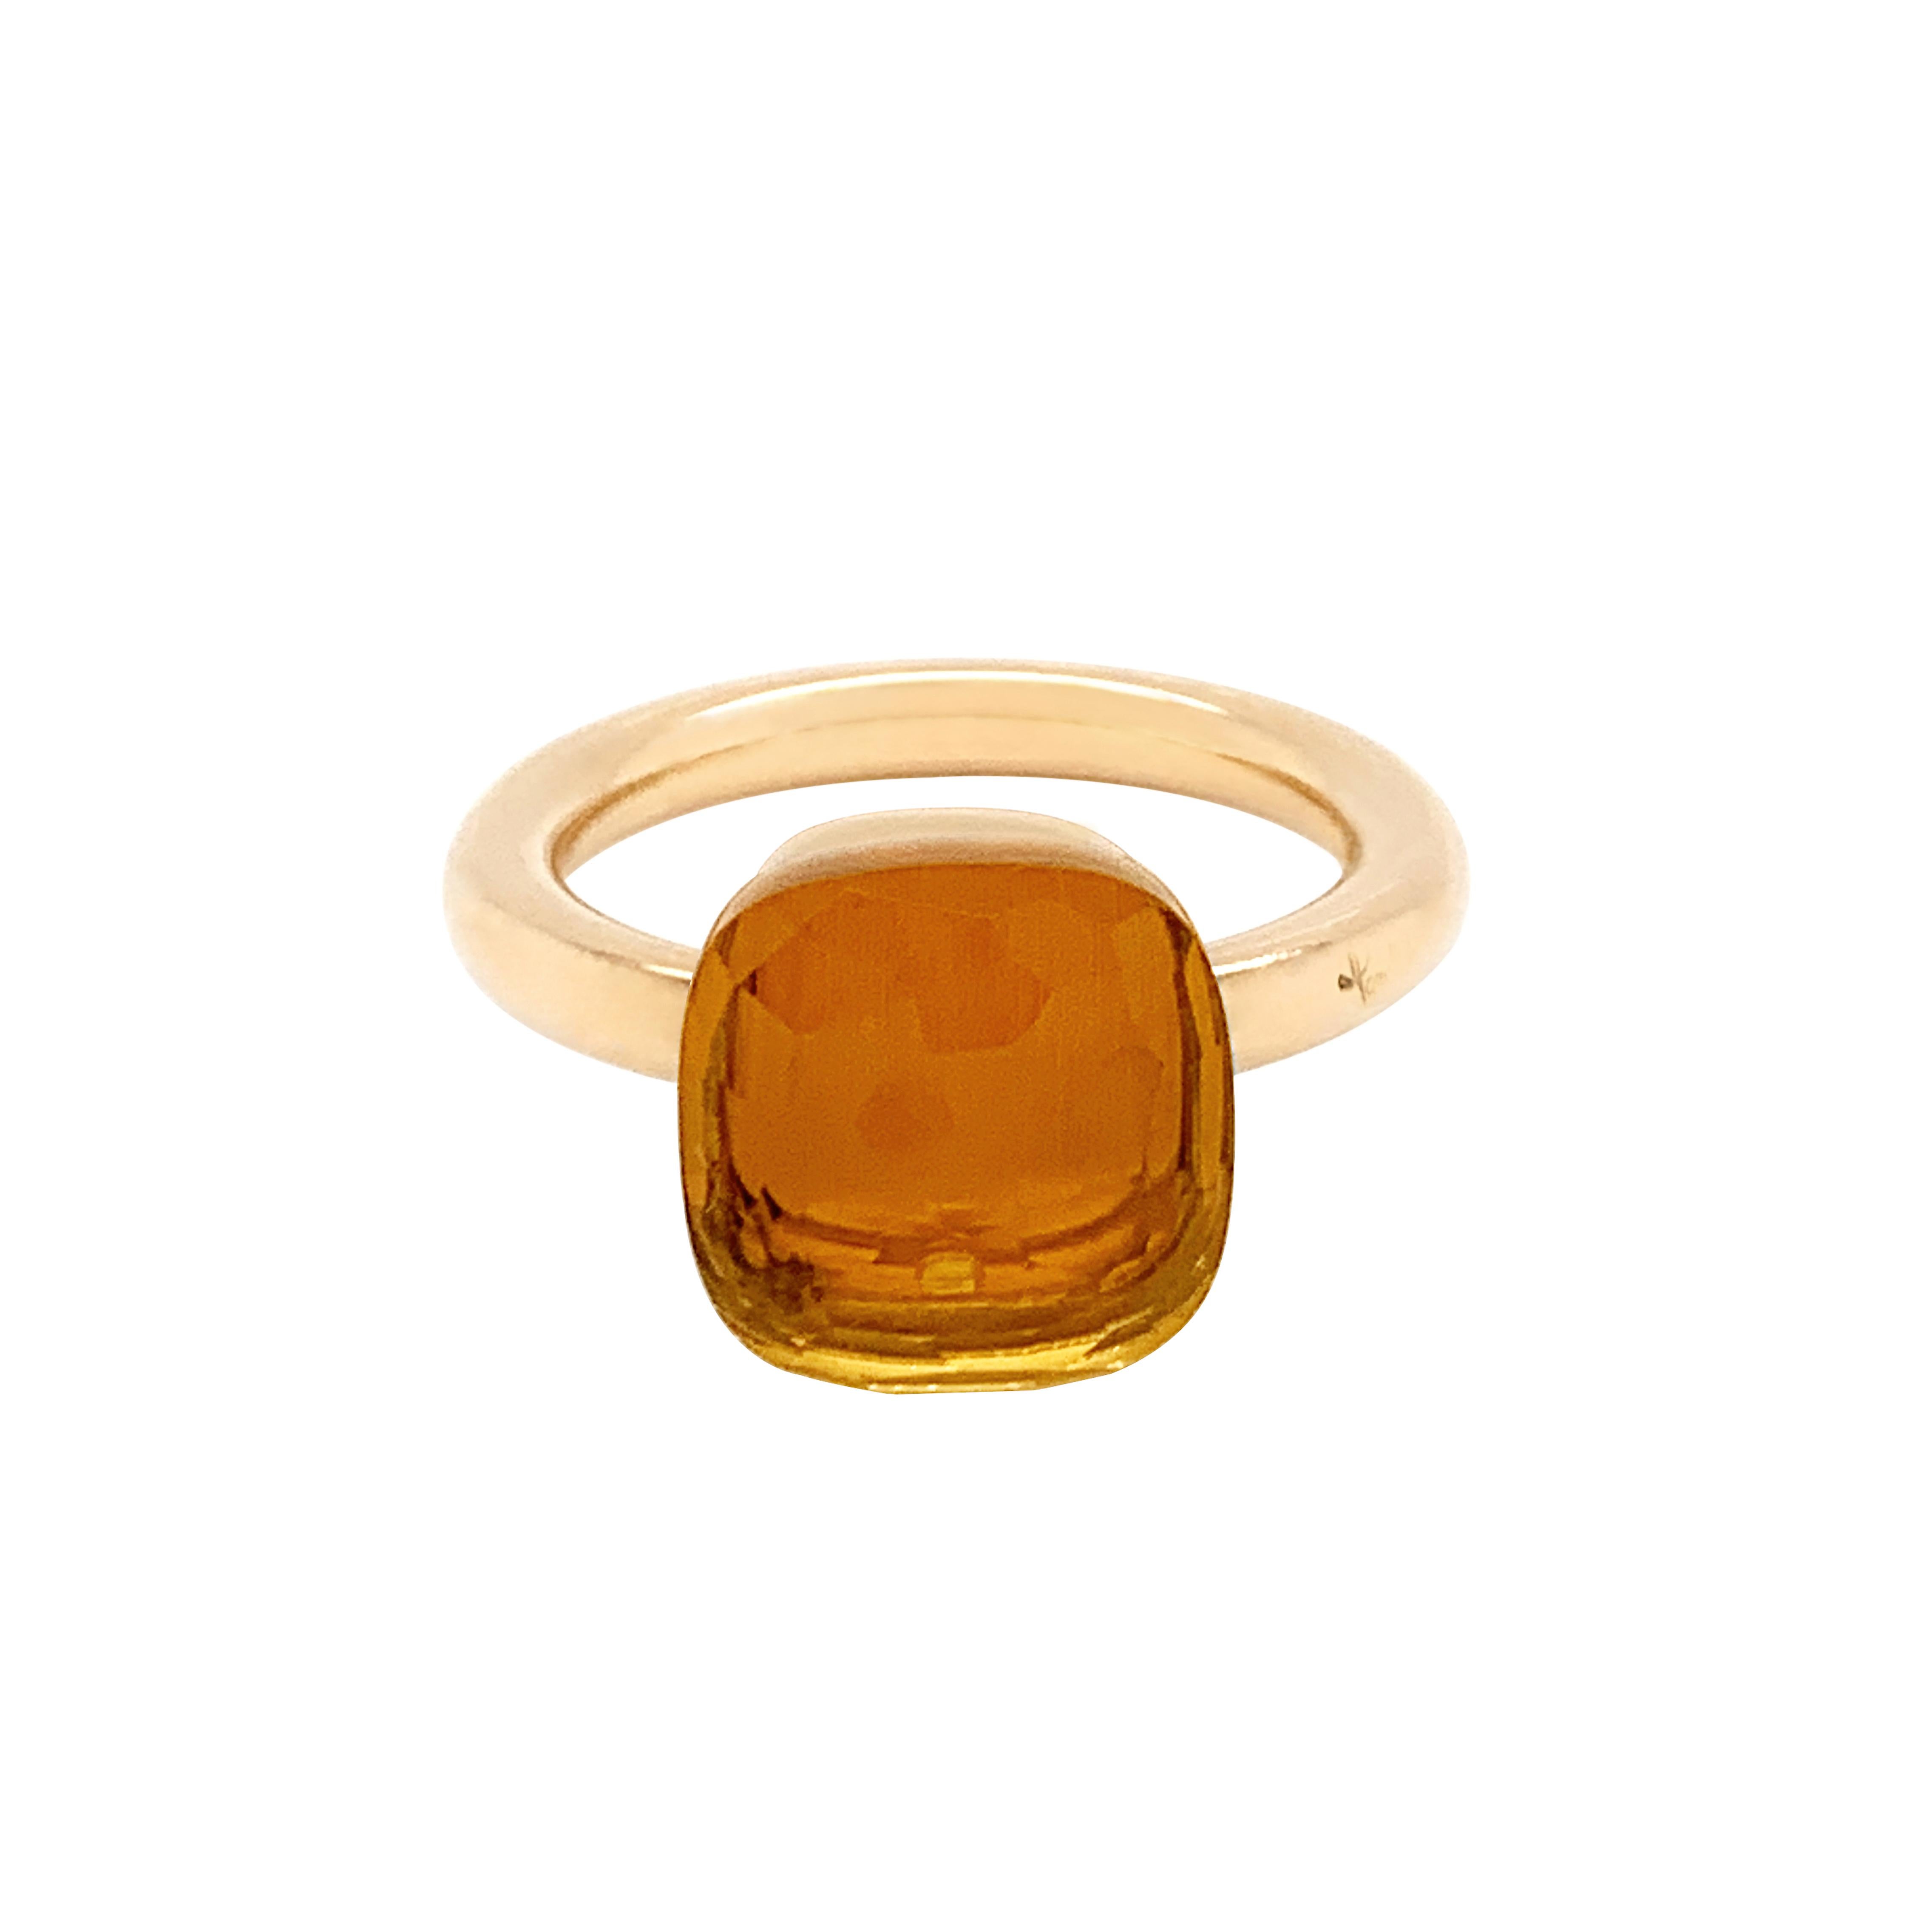 From the classic Pomellato 'Nudo' collection, a beautiful citrine quartz measuring approximately 10mm x 10mm and weighs approximately 5.00 carat mounted in 18 carat rose gold. The ring features the classic Pomellato signature and hallmarks. UK